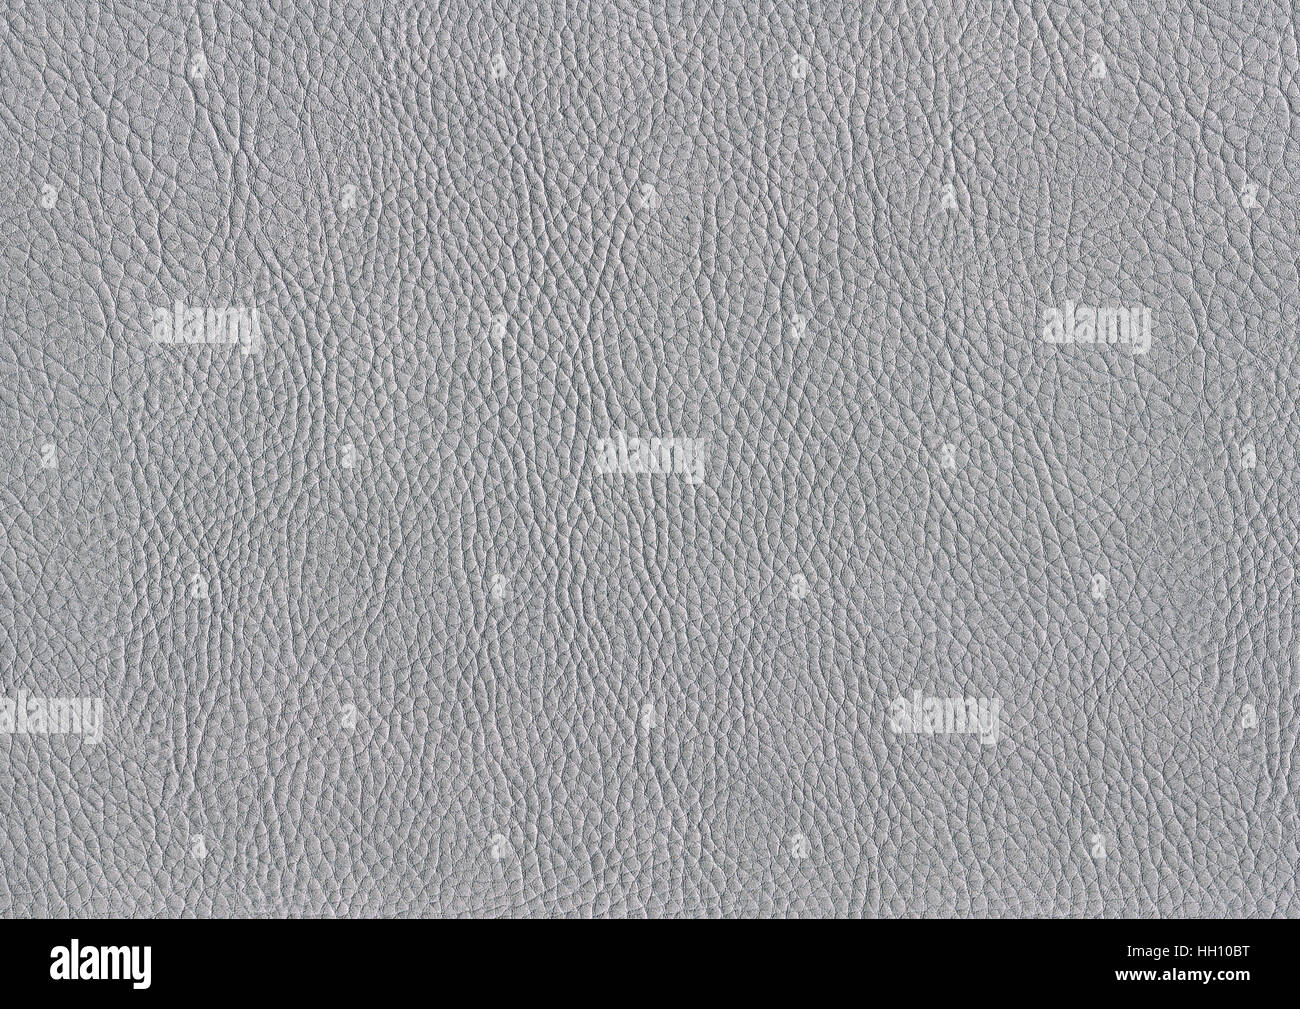 a full frame abstract grey leather background Stock Photo